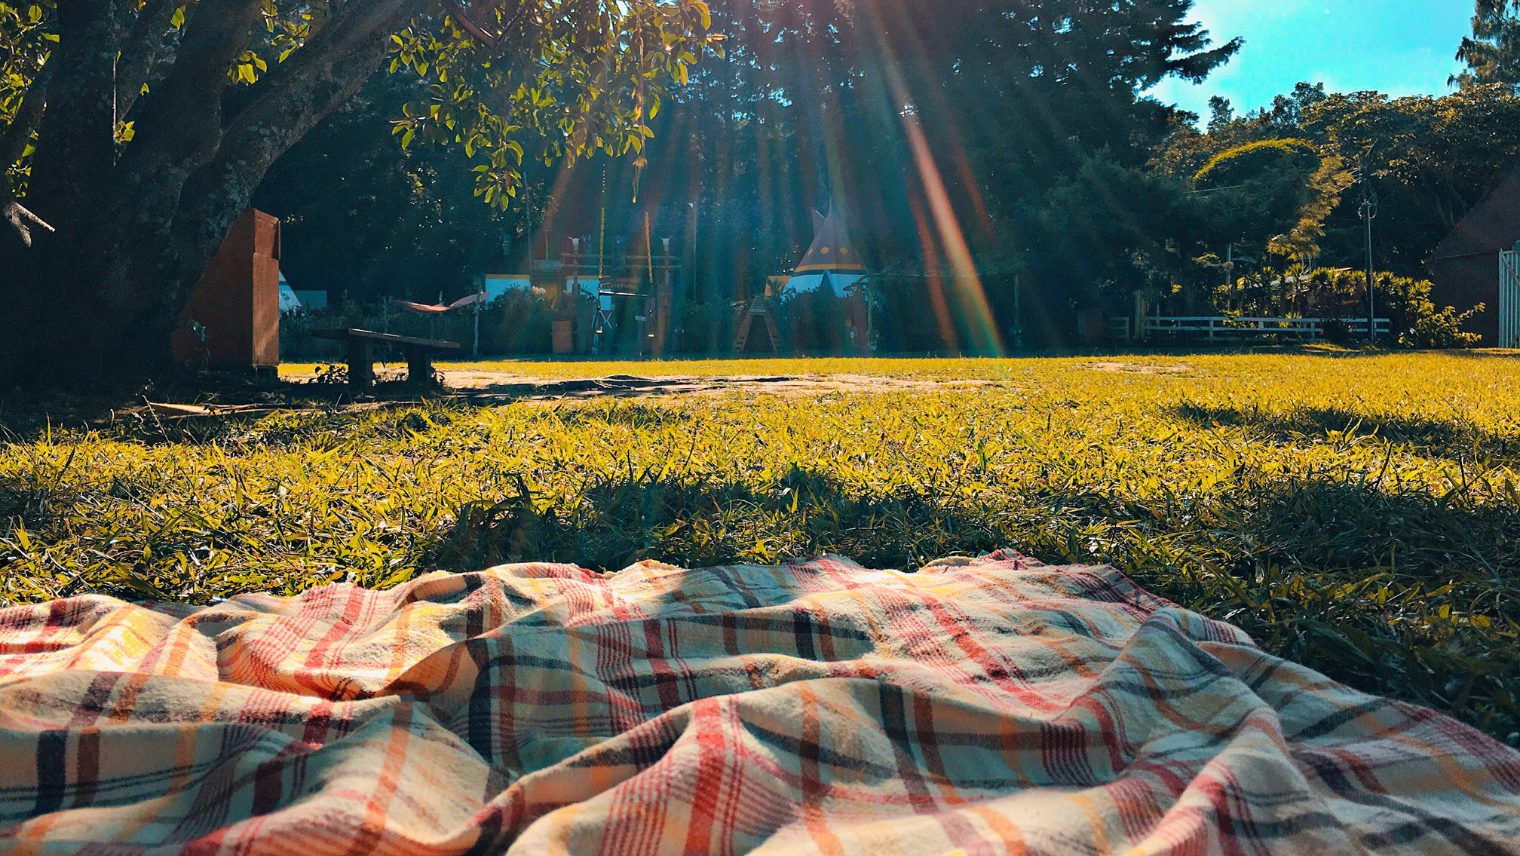 An image of a picnic blanket on the grass